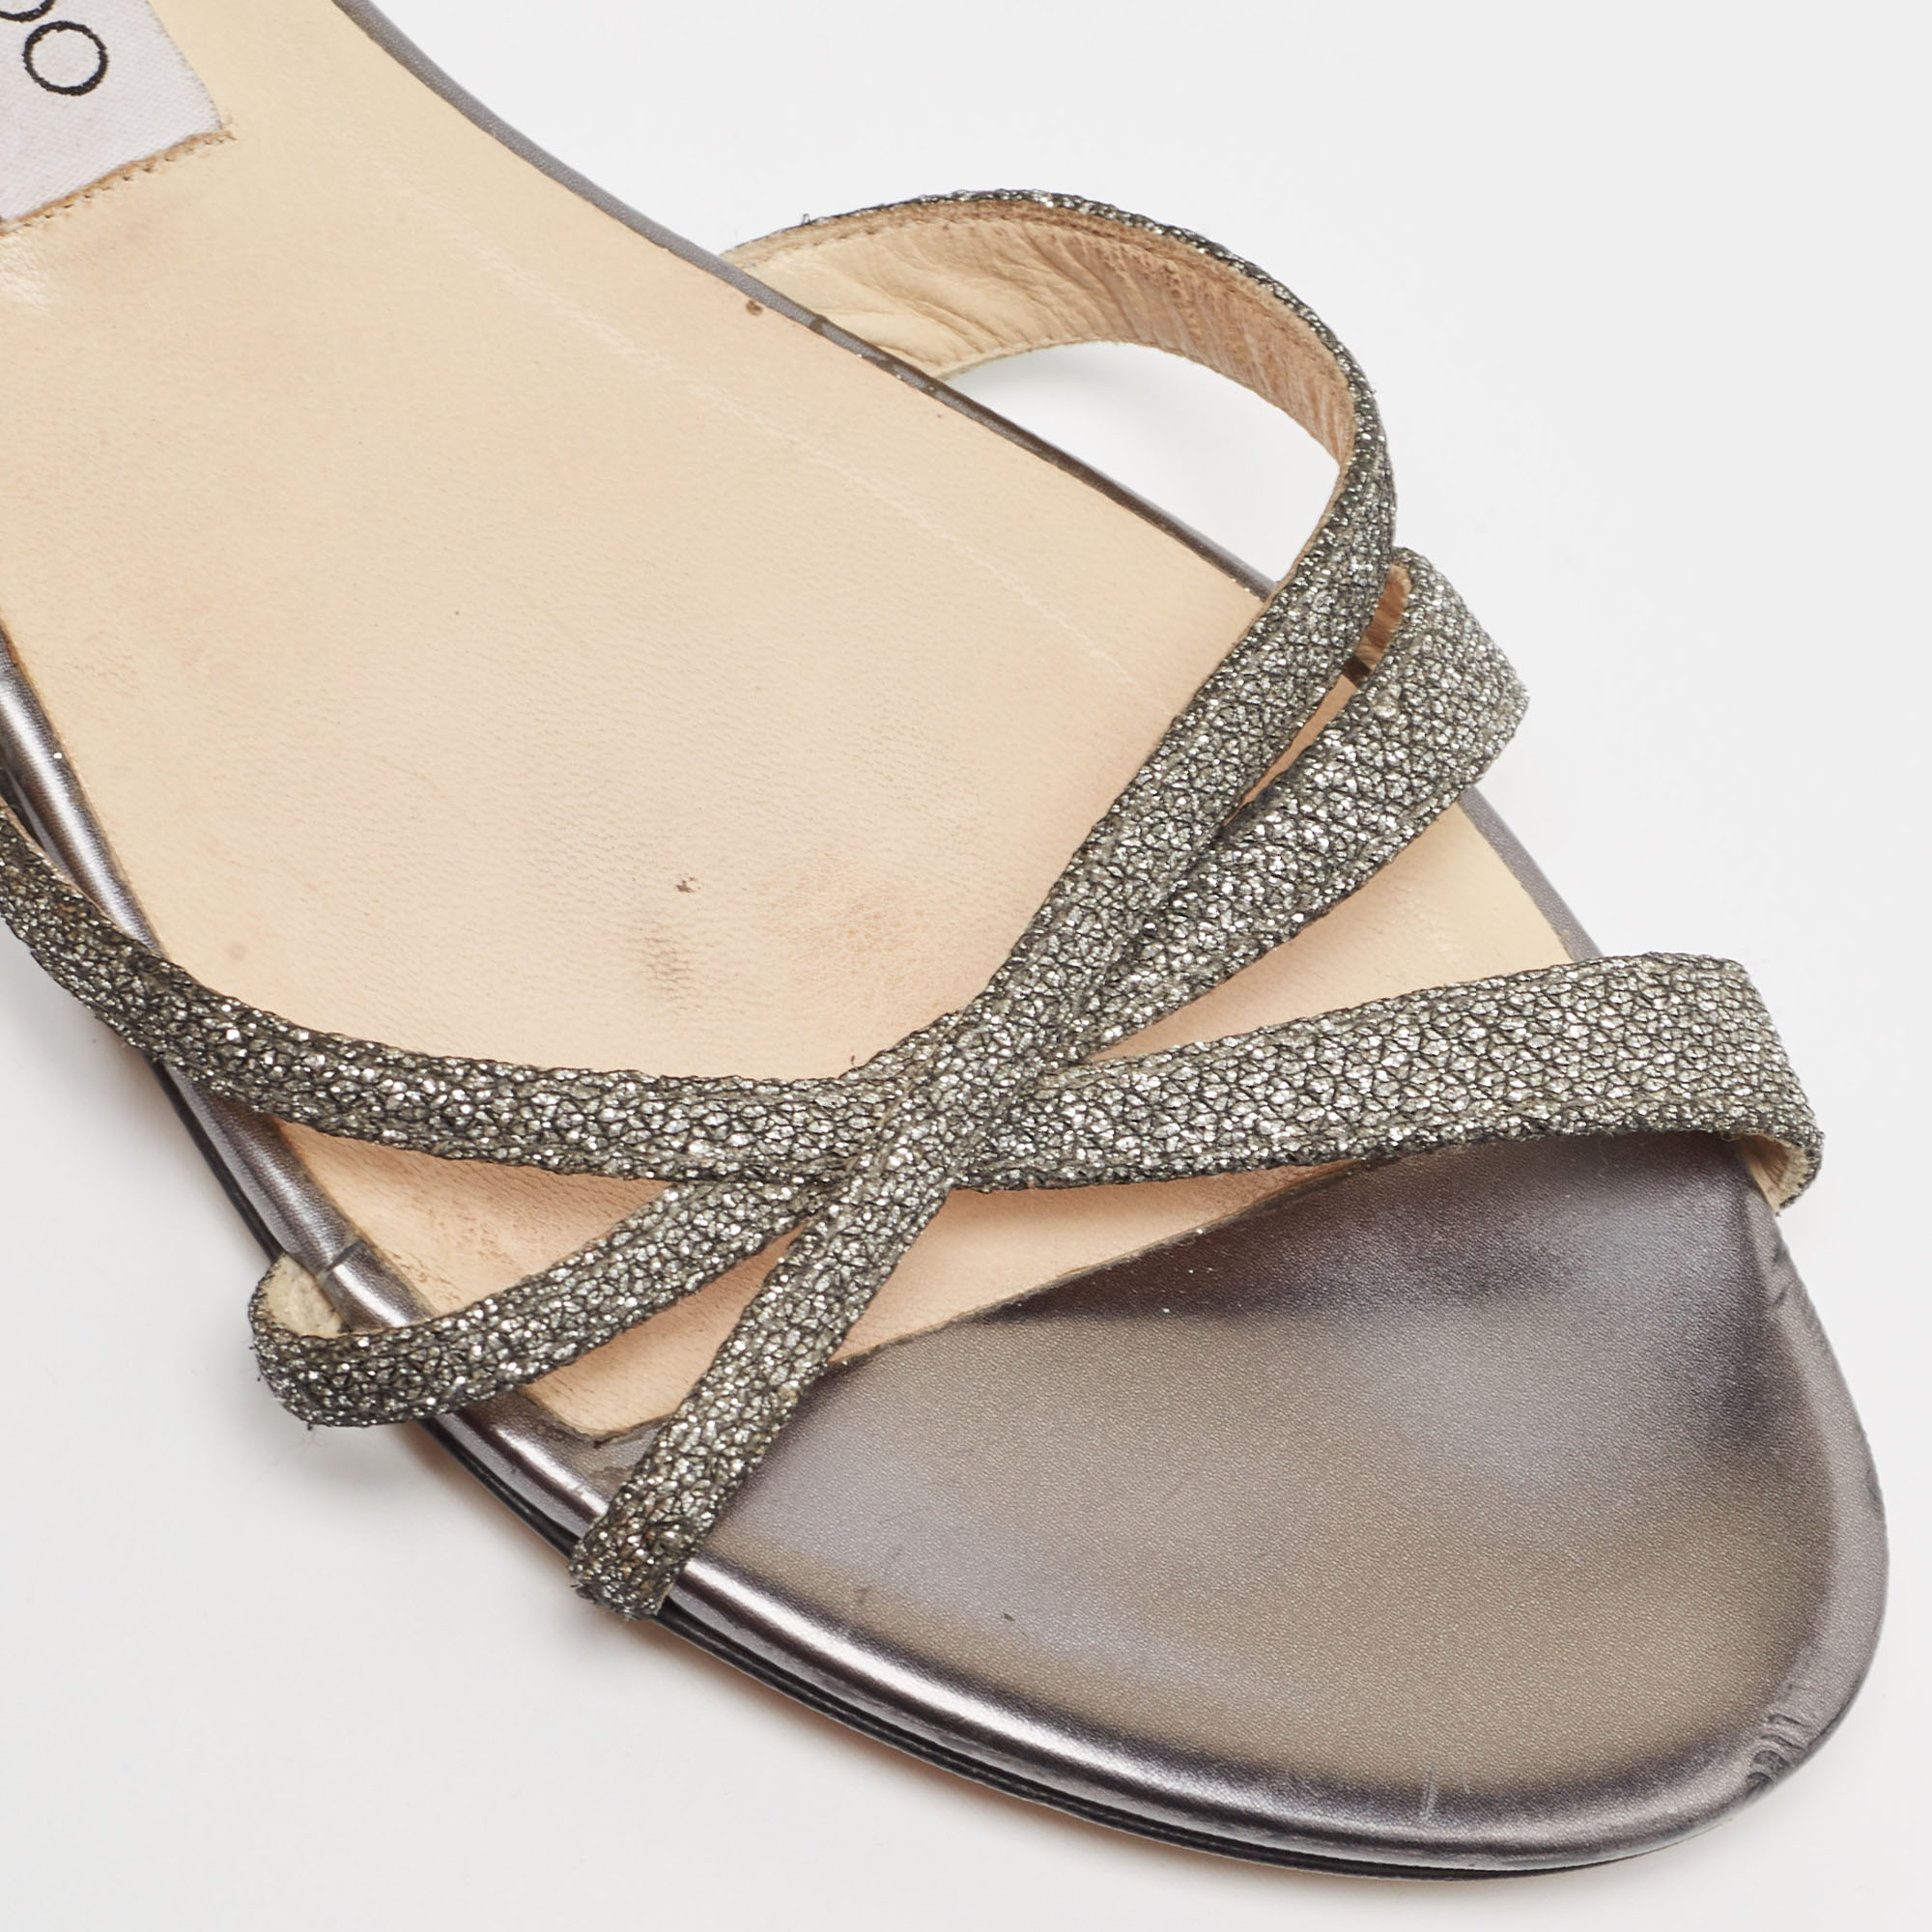 Jimmy Choo Metallic Glitter And Leather Strappy Flat Sandals Size 39